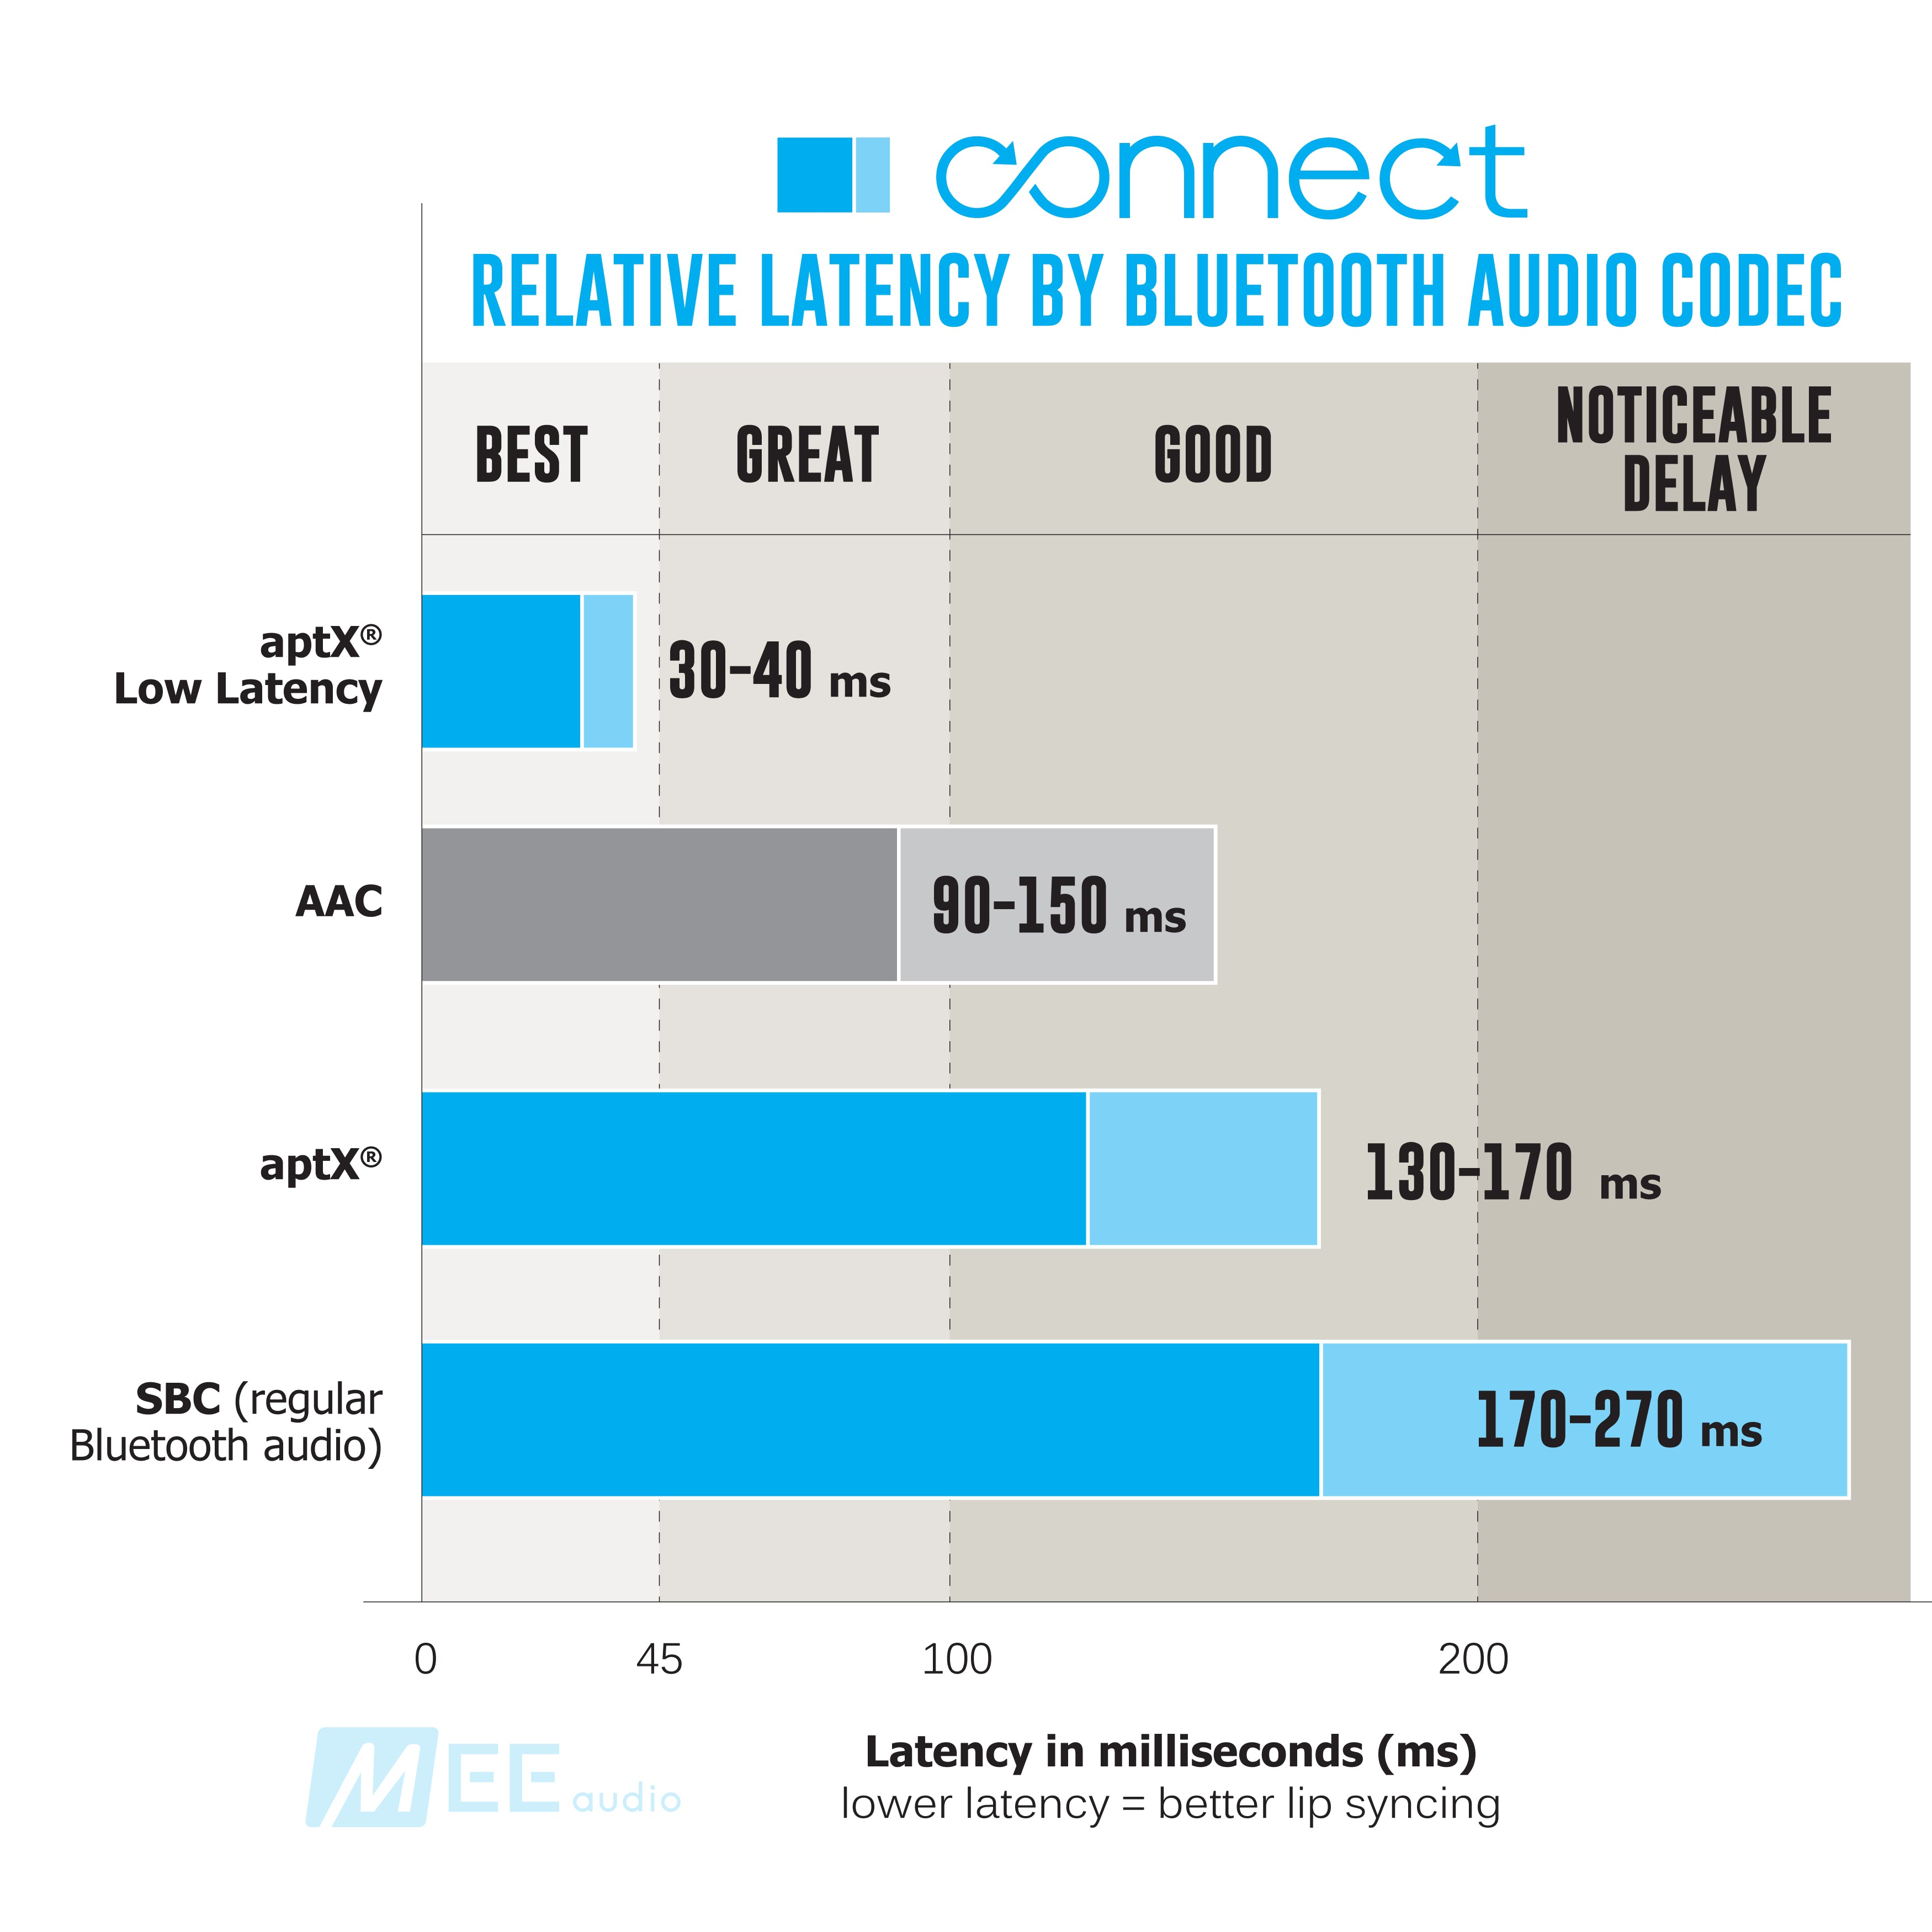 Bar graph comparison of audio codec latencies by connect: lowest to highest from aptx low latency, aac, aptx, to sbc showing millisecond delays. categories range from best (lowest delay) to noticeable delay.